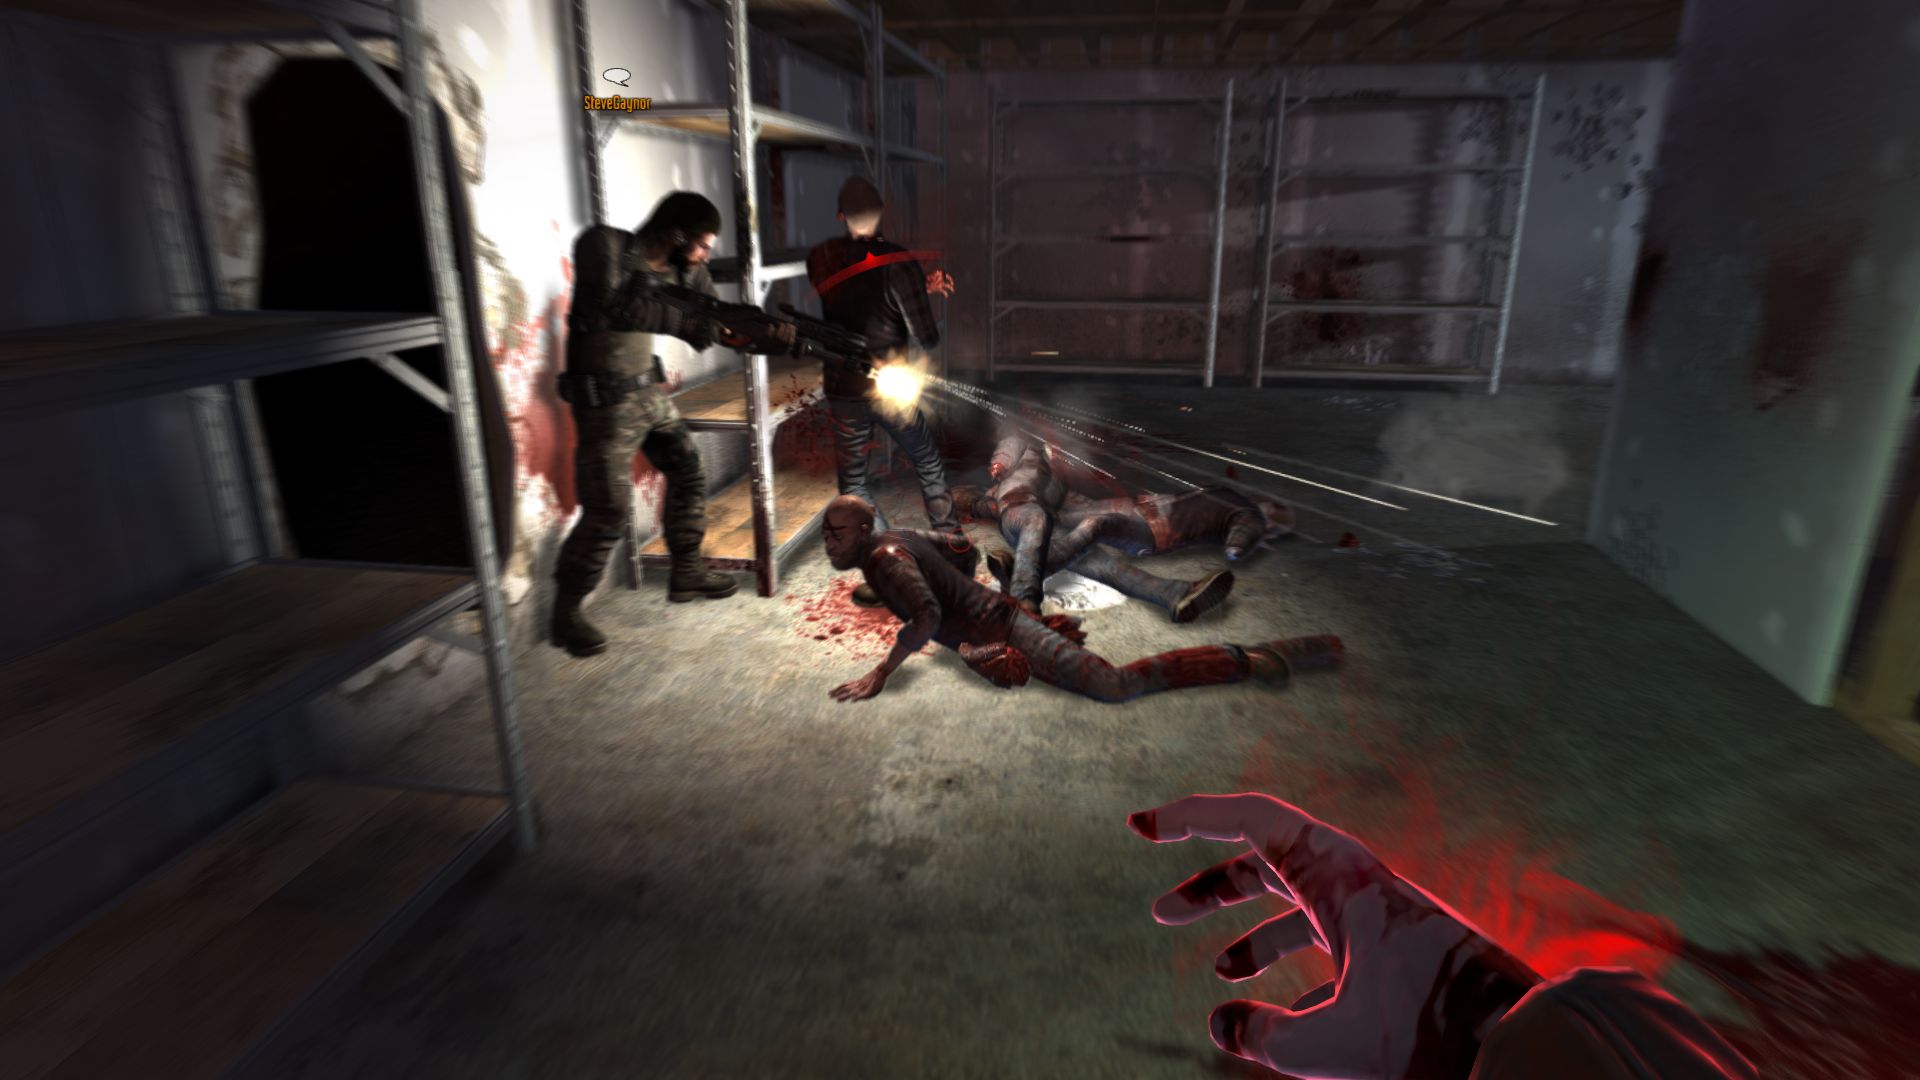 fear 3 pc download